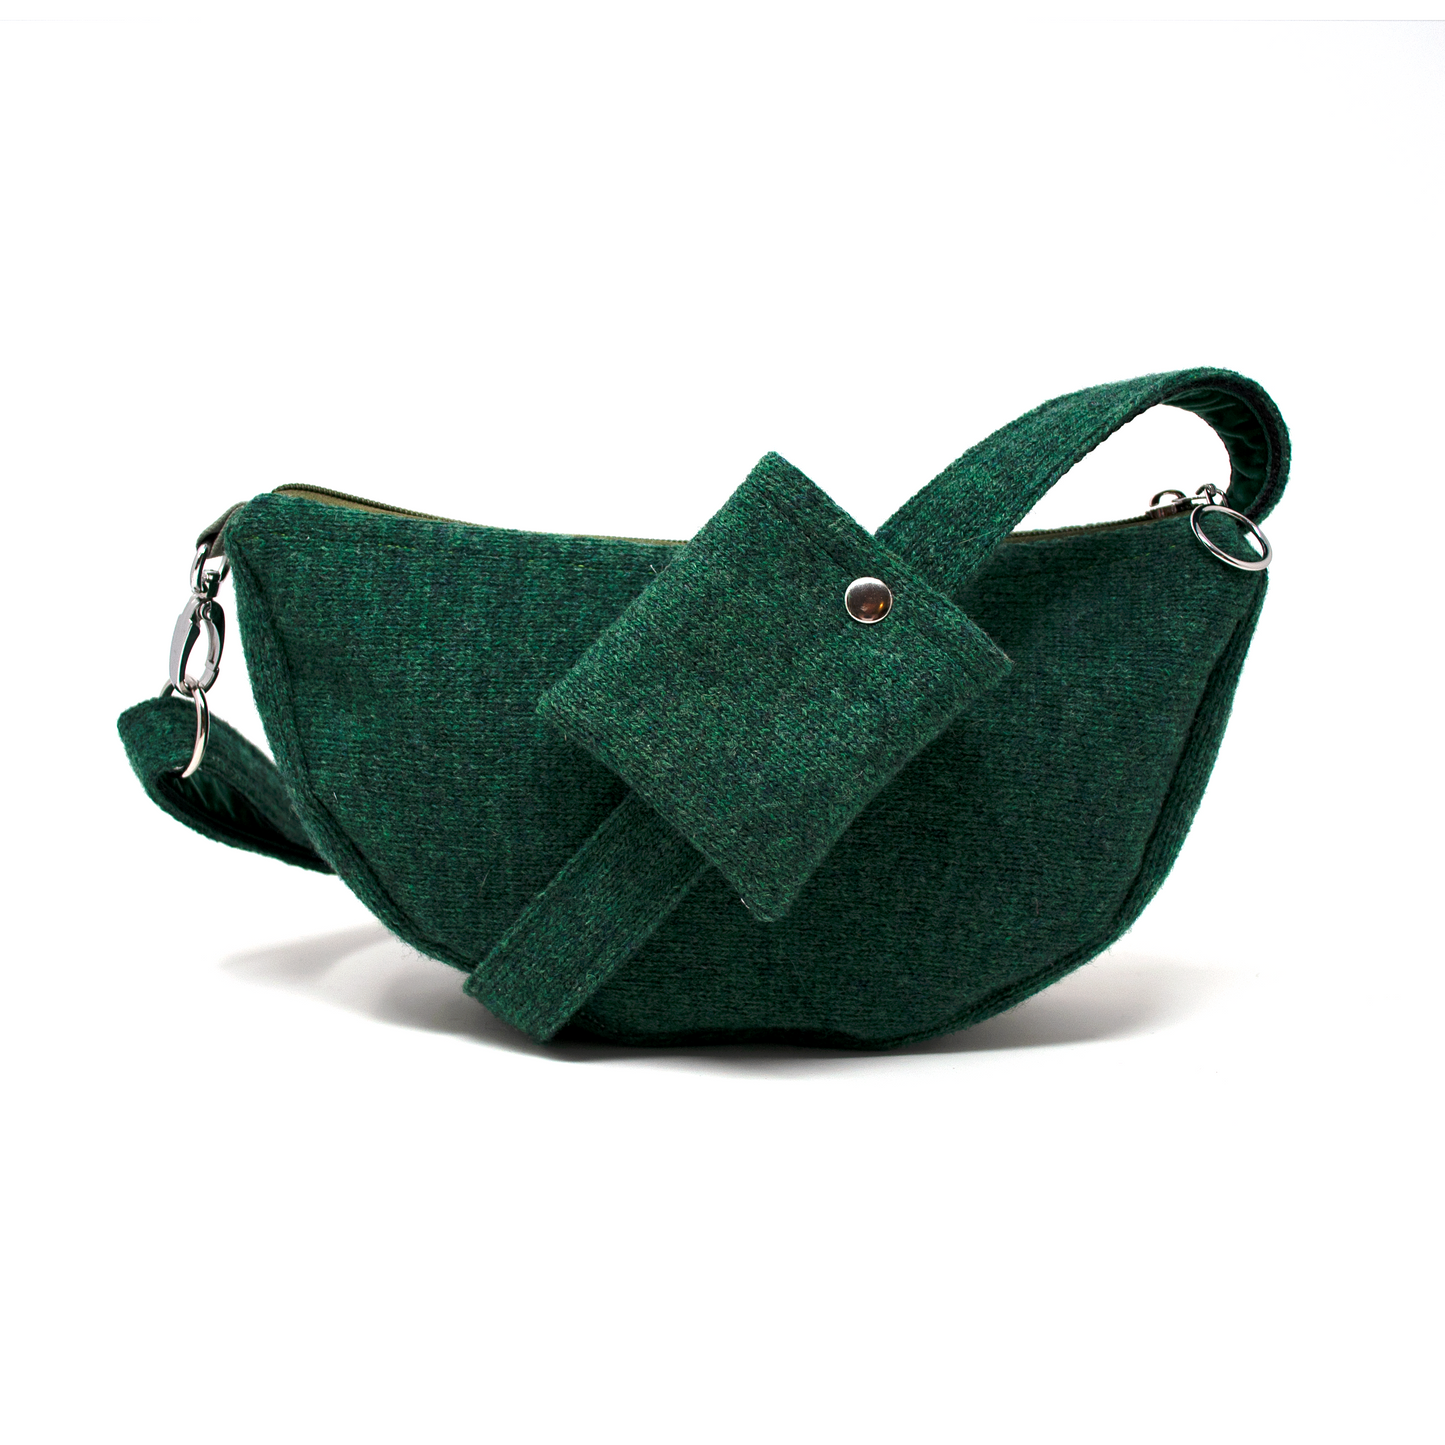 Clover Leaf - Autumn/Winter '23 Collection - Luxury Cross Body Bag